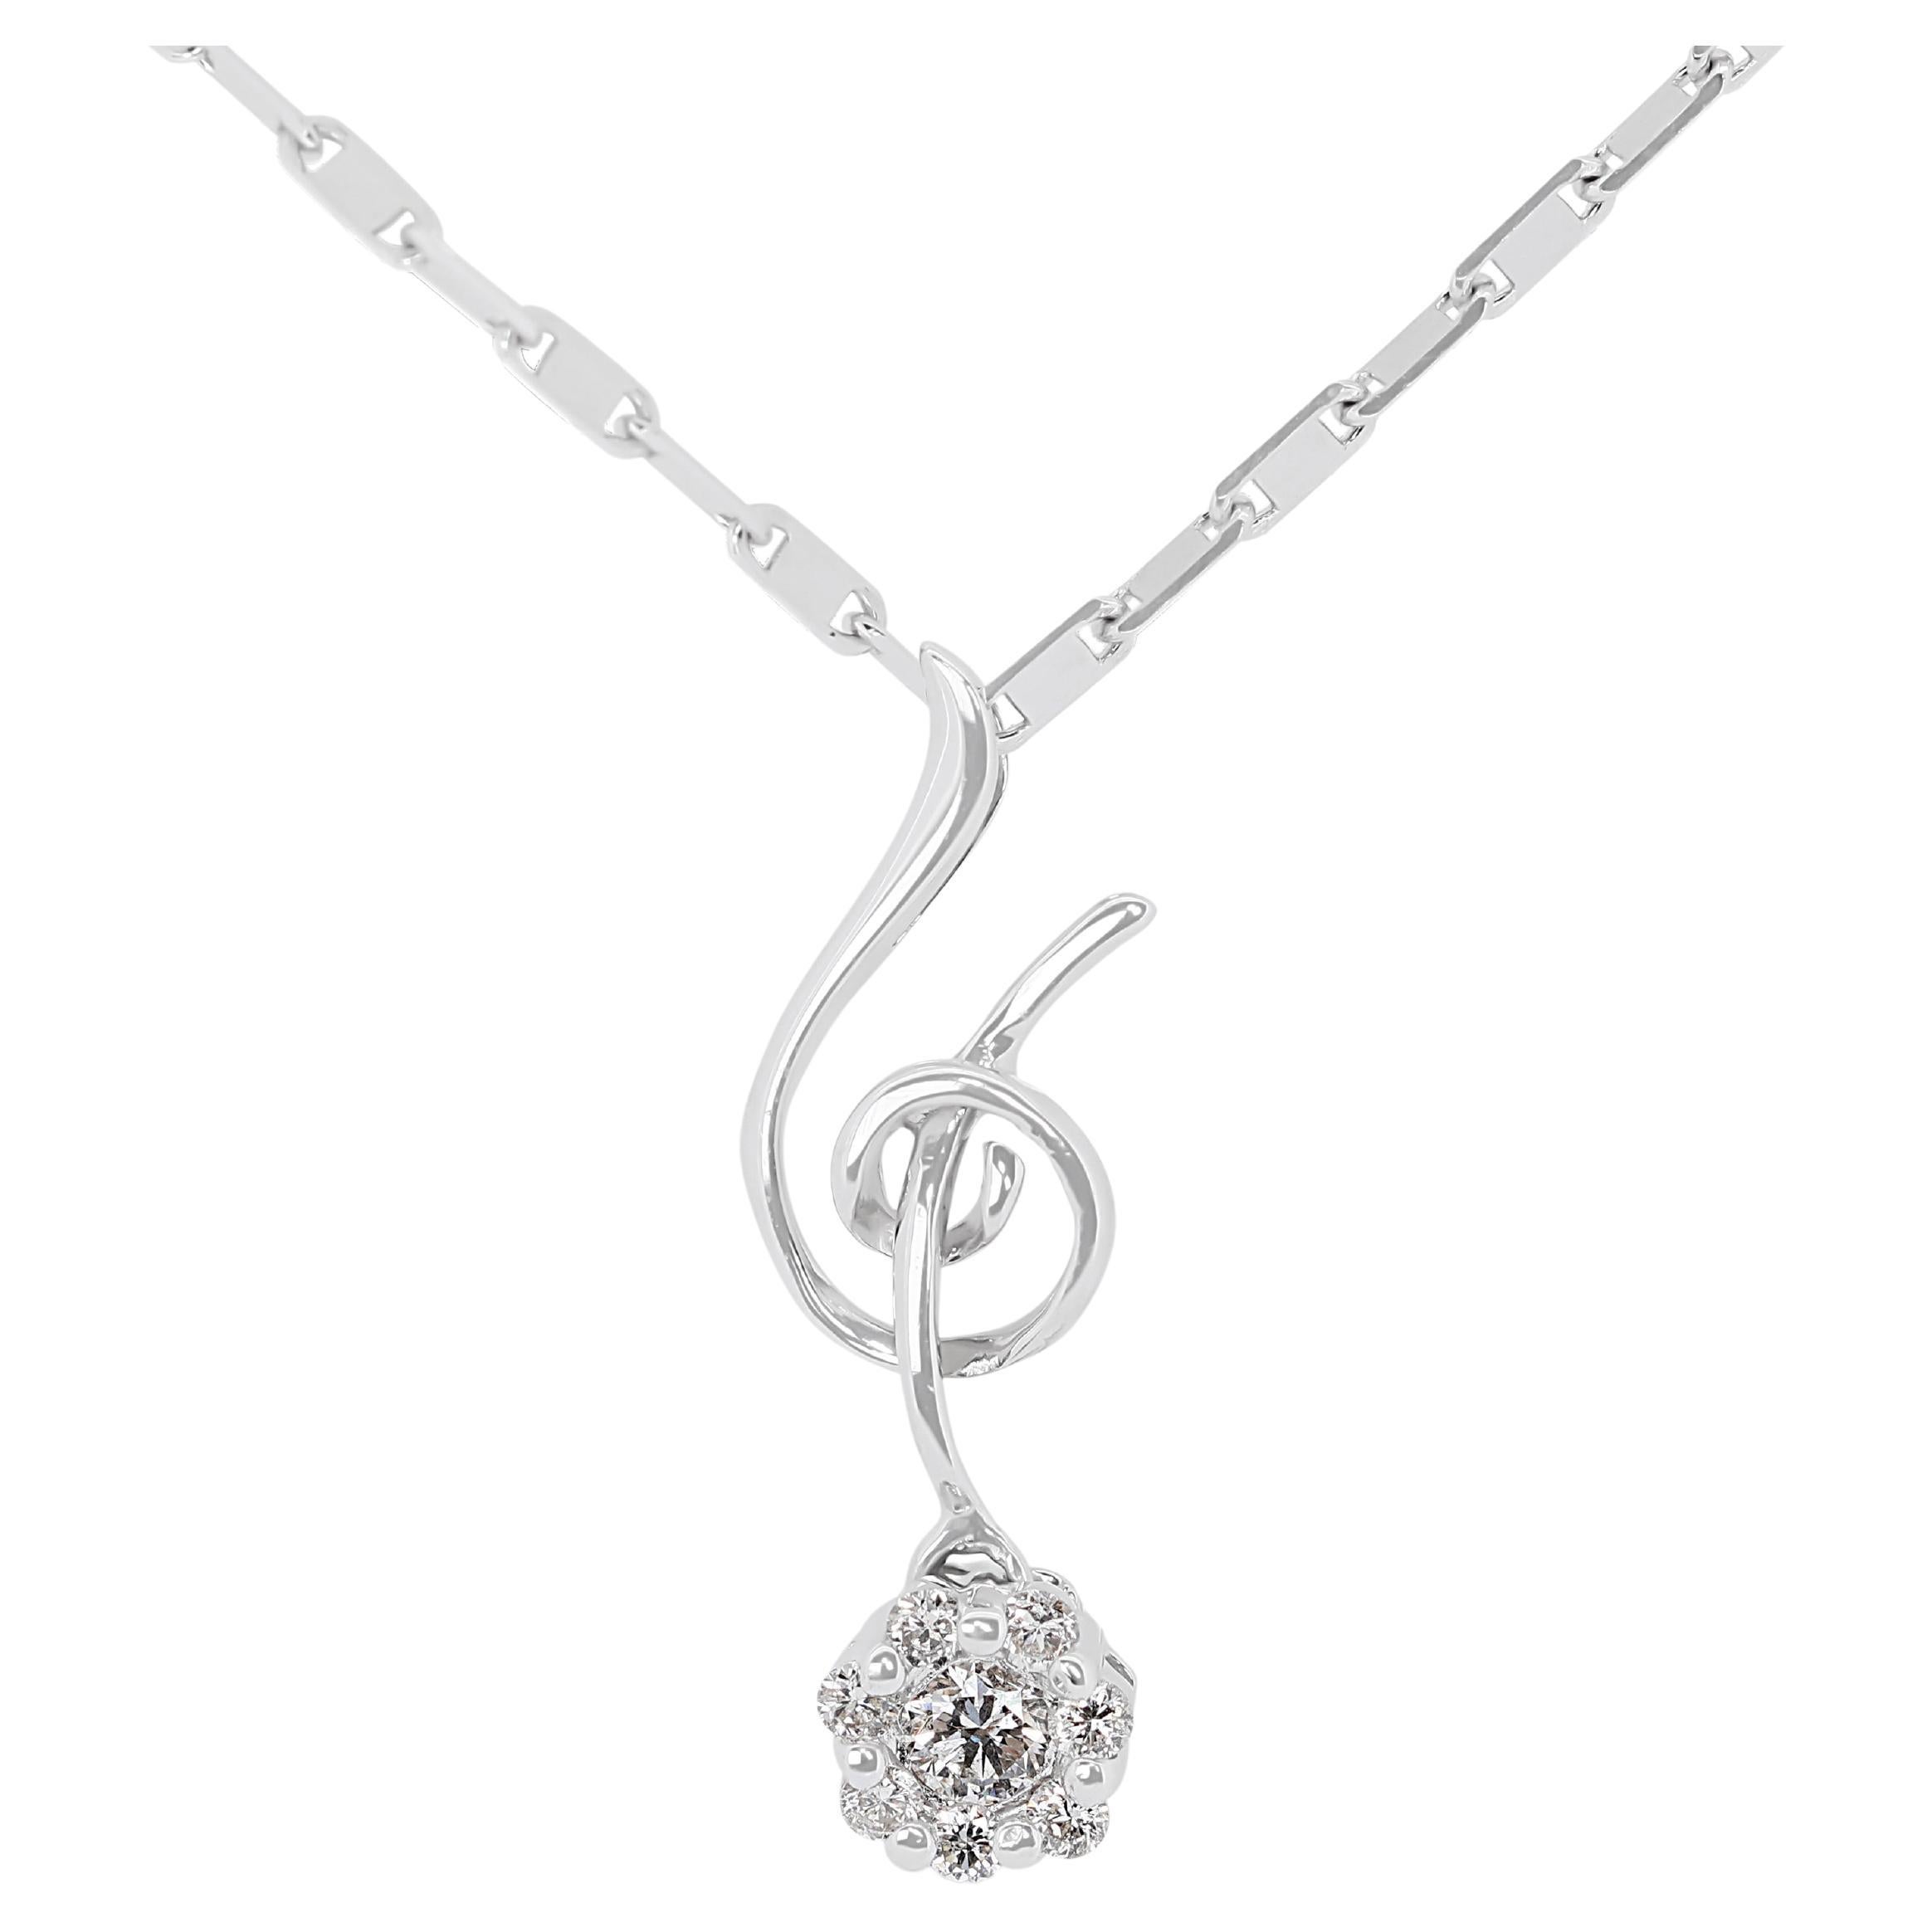 Stunning 0.16ct Diamonds Necklace in 18K White Gold - (Chain Included) For Sale